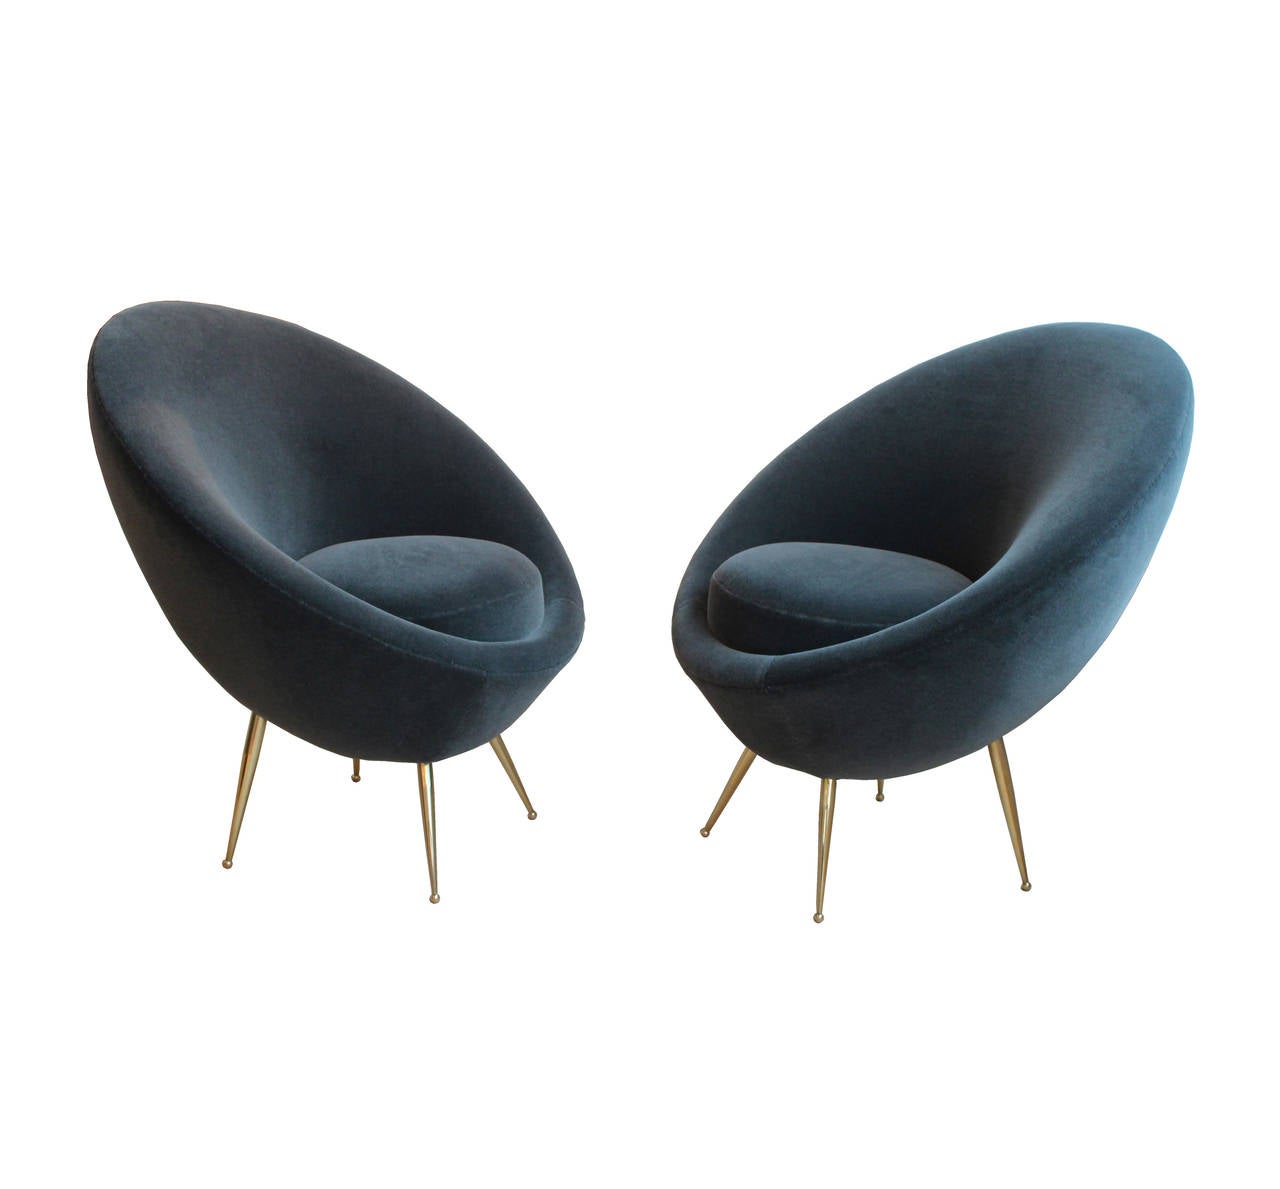 Pair of 'Uovo' armchairs with brass legs in the style of Ico Parisi.